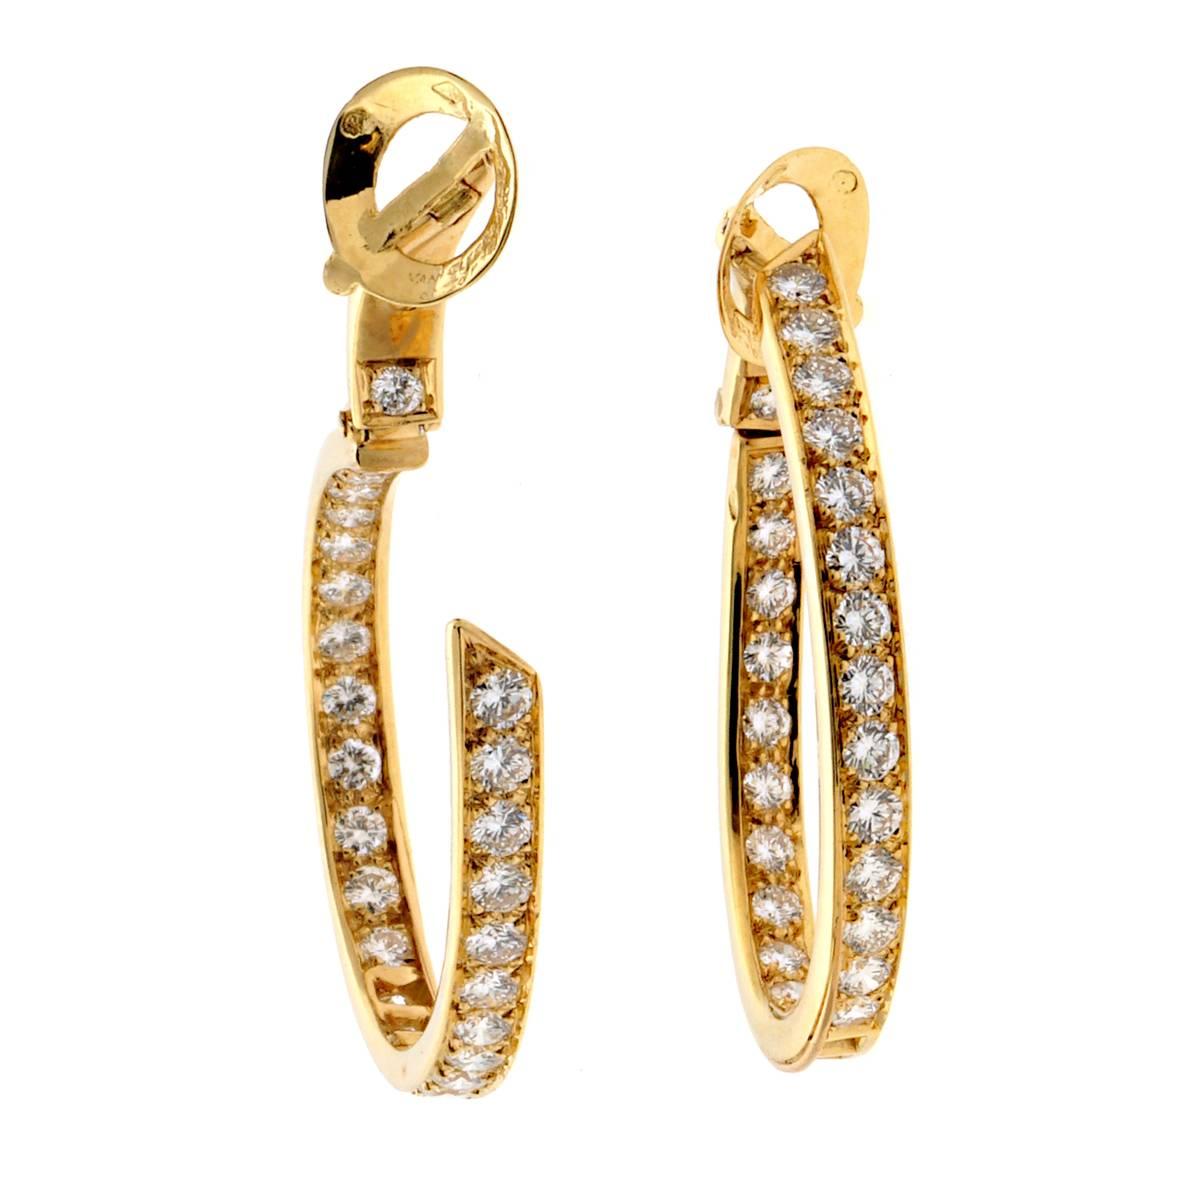 A chic pair of Van Cleef & Arpels earrings featuring an infinity design set with the 3.6cts appx of finest Van Cleef & Arpels round brilliant cut diamonds set inside and out in 18k yellow gold. 

Length: 1.37